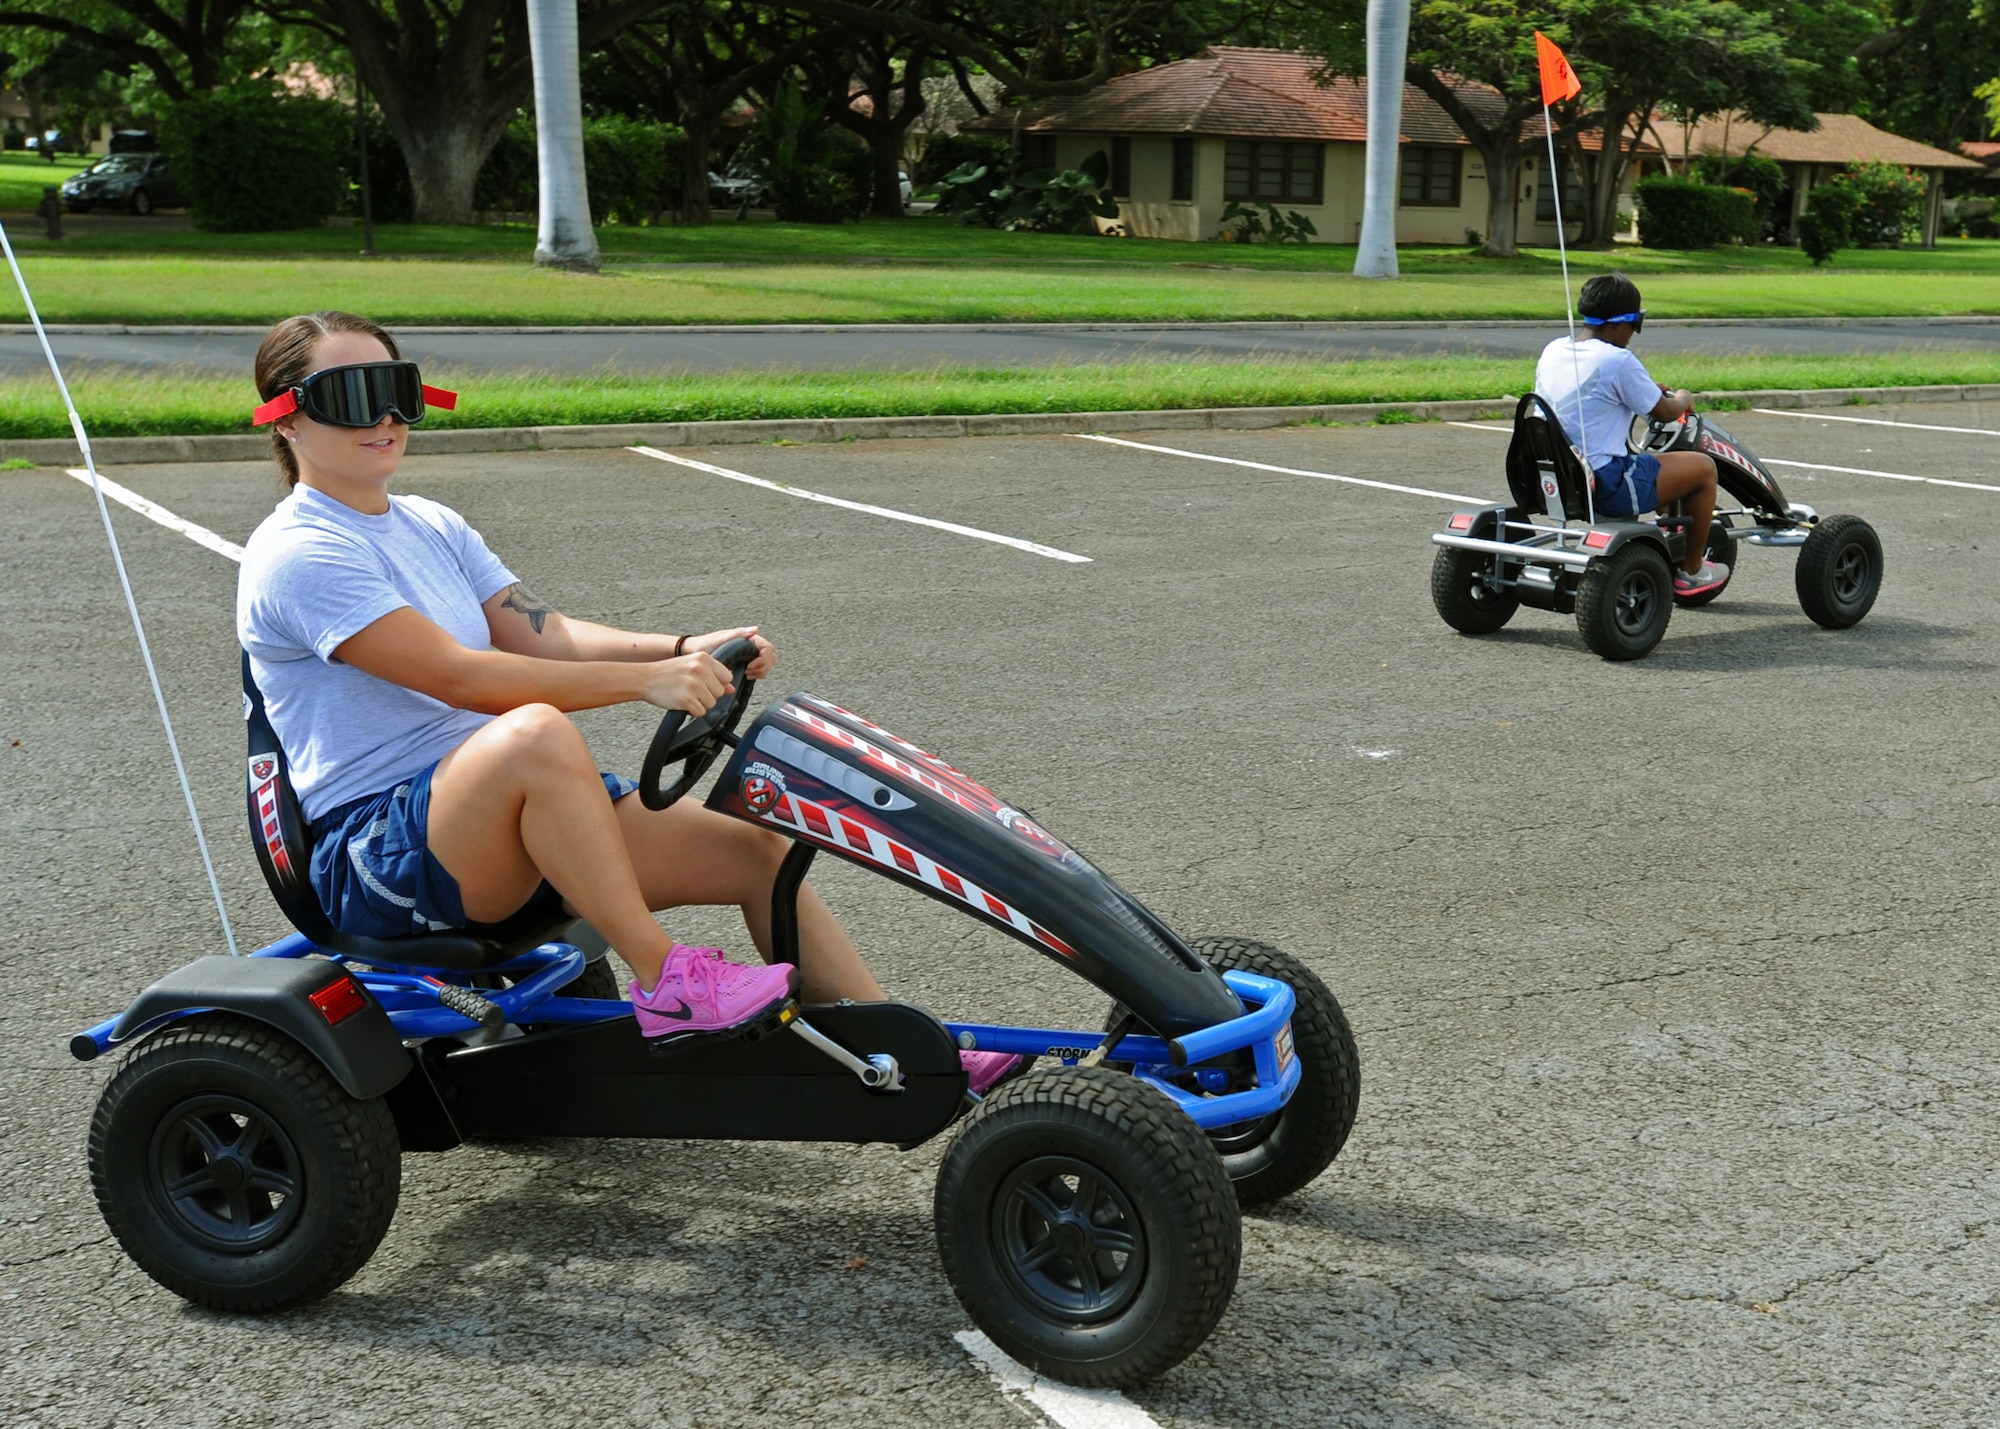 Airmen from the 15th Medical Group struggle to drive as they take part in a driving simulation game while wearing goggles that replicate the effects of alcohol during the group’s Wingman Day at Joint Base Pearl Harbor-Hickam, Hawaii, Feb. 20, 2014. The event highlighted the dangers of drinking and driving and the consequences associated with it. (U.S. Air Force photo/Master Sgt. Jerome S. Tayborn)